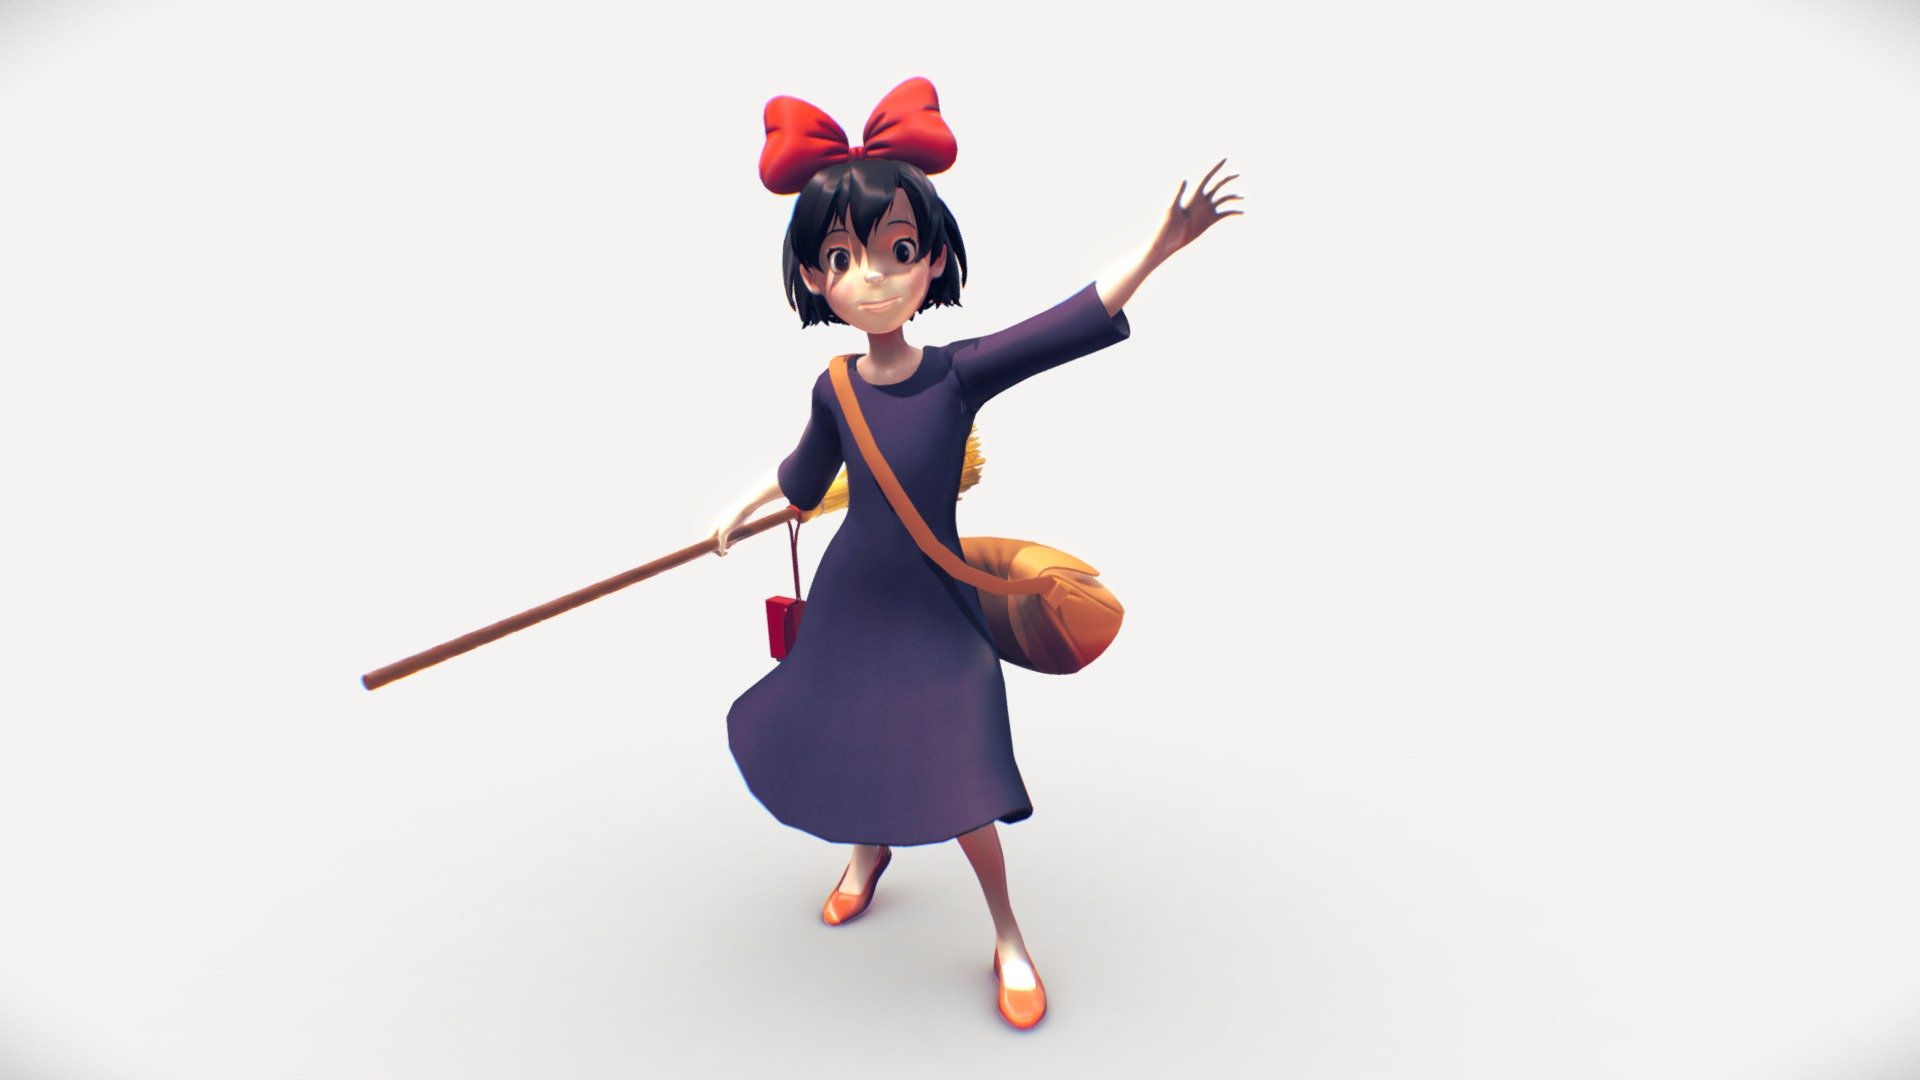 Kiki's Delivery Service Kiki Model/Animation Rig

Ghibli - Kiki's Delivery Service - Kiki Stylized Model - Game Ready Animation Rig




Includes Kiki Low Poly Game Ready Model

Includes Zbrush High Poly file with subdivisions

Includes Animation Rig for Maya 2019

Materials setup for rendering in Arnold

2k PBR Textures

ma, mb, fbx, ztl

BONUS Includes Broom Model and Rig! Includes Radio Model and Rig! - Kiki's Delivery Service Kiki Model/Animation Rig - 3D model by rigsnthings 3d model